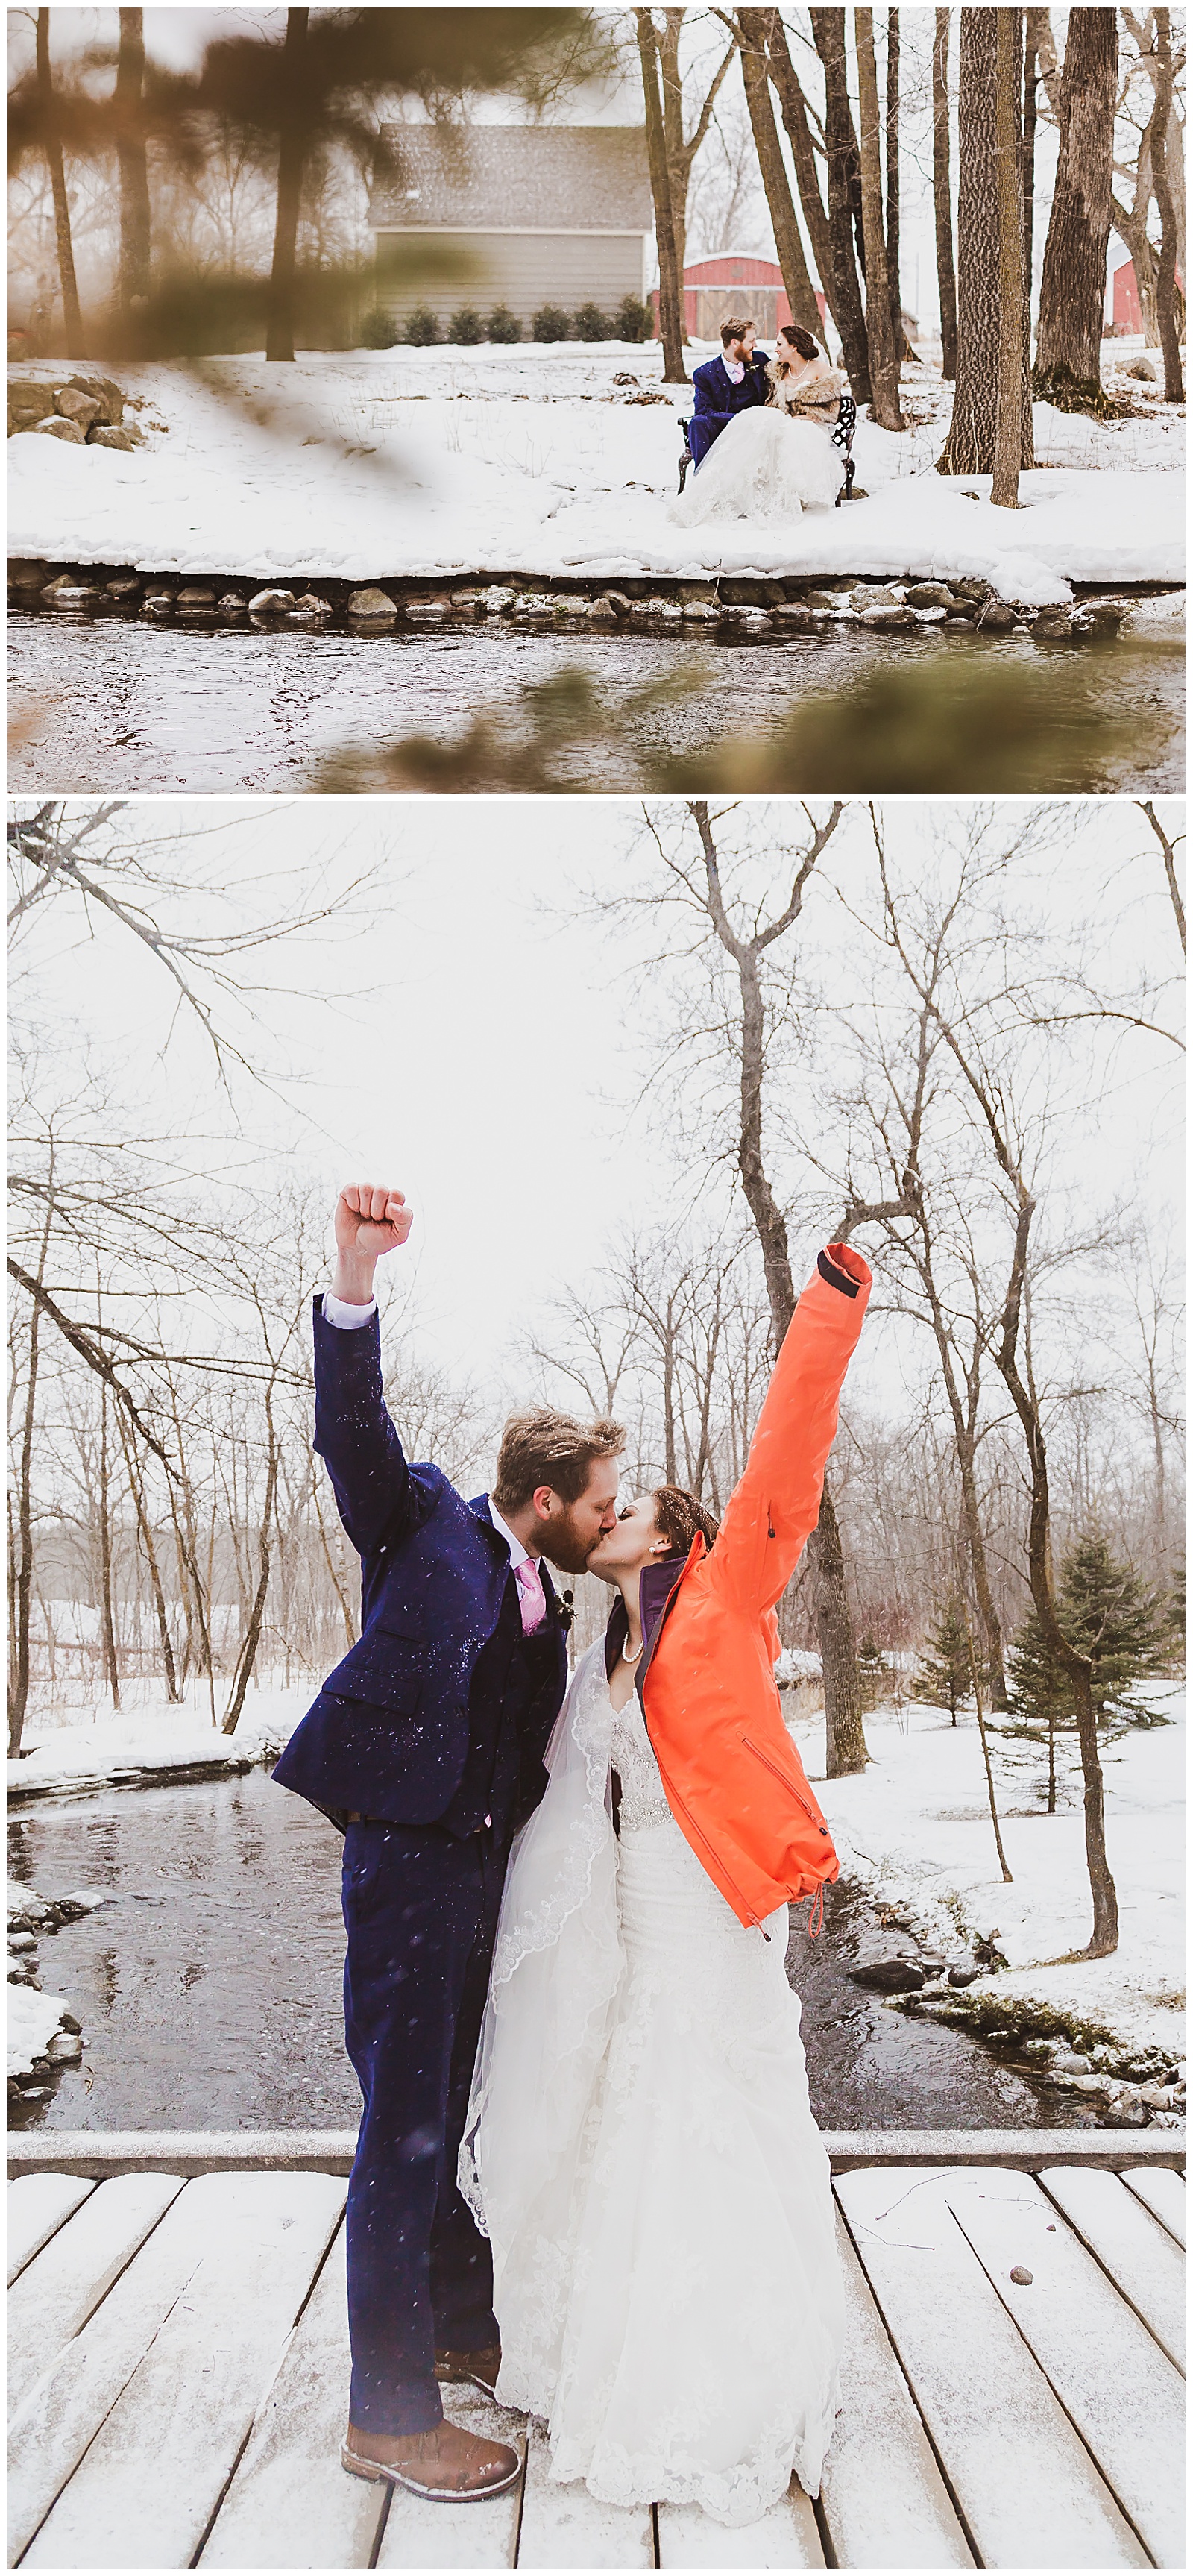 wedding at creekside farm in minnesota in the snow